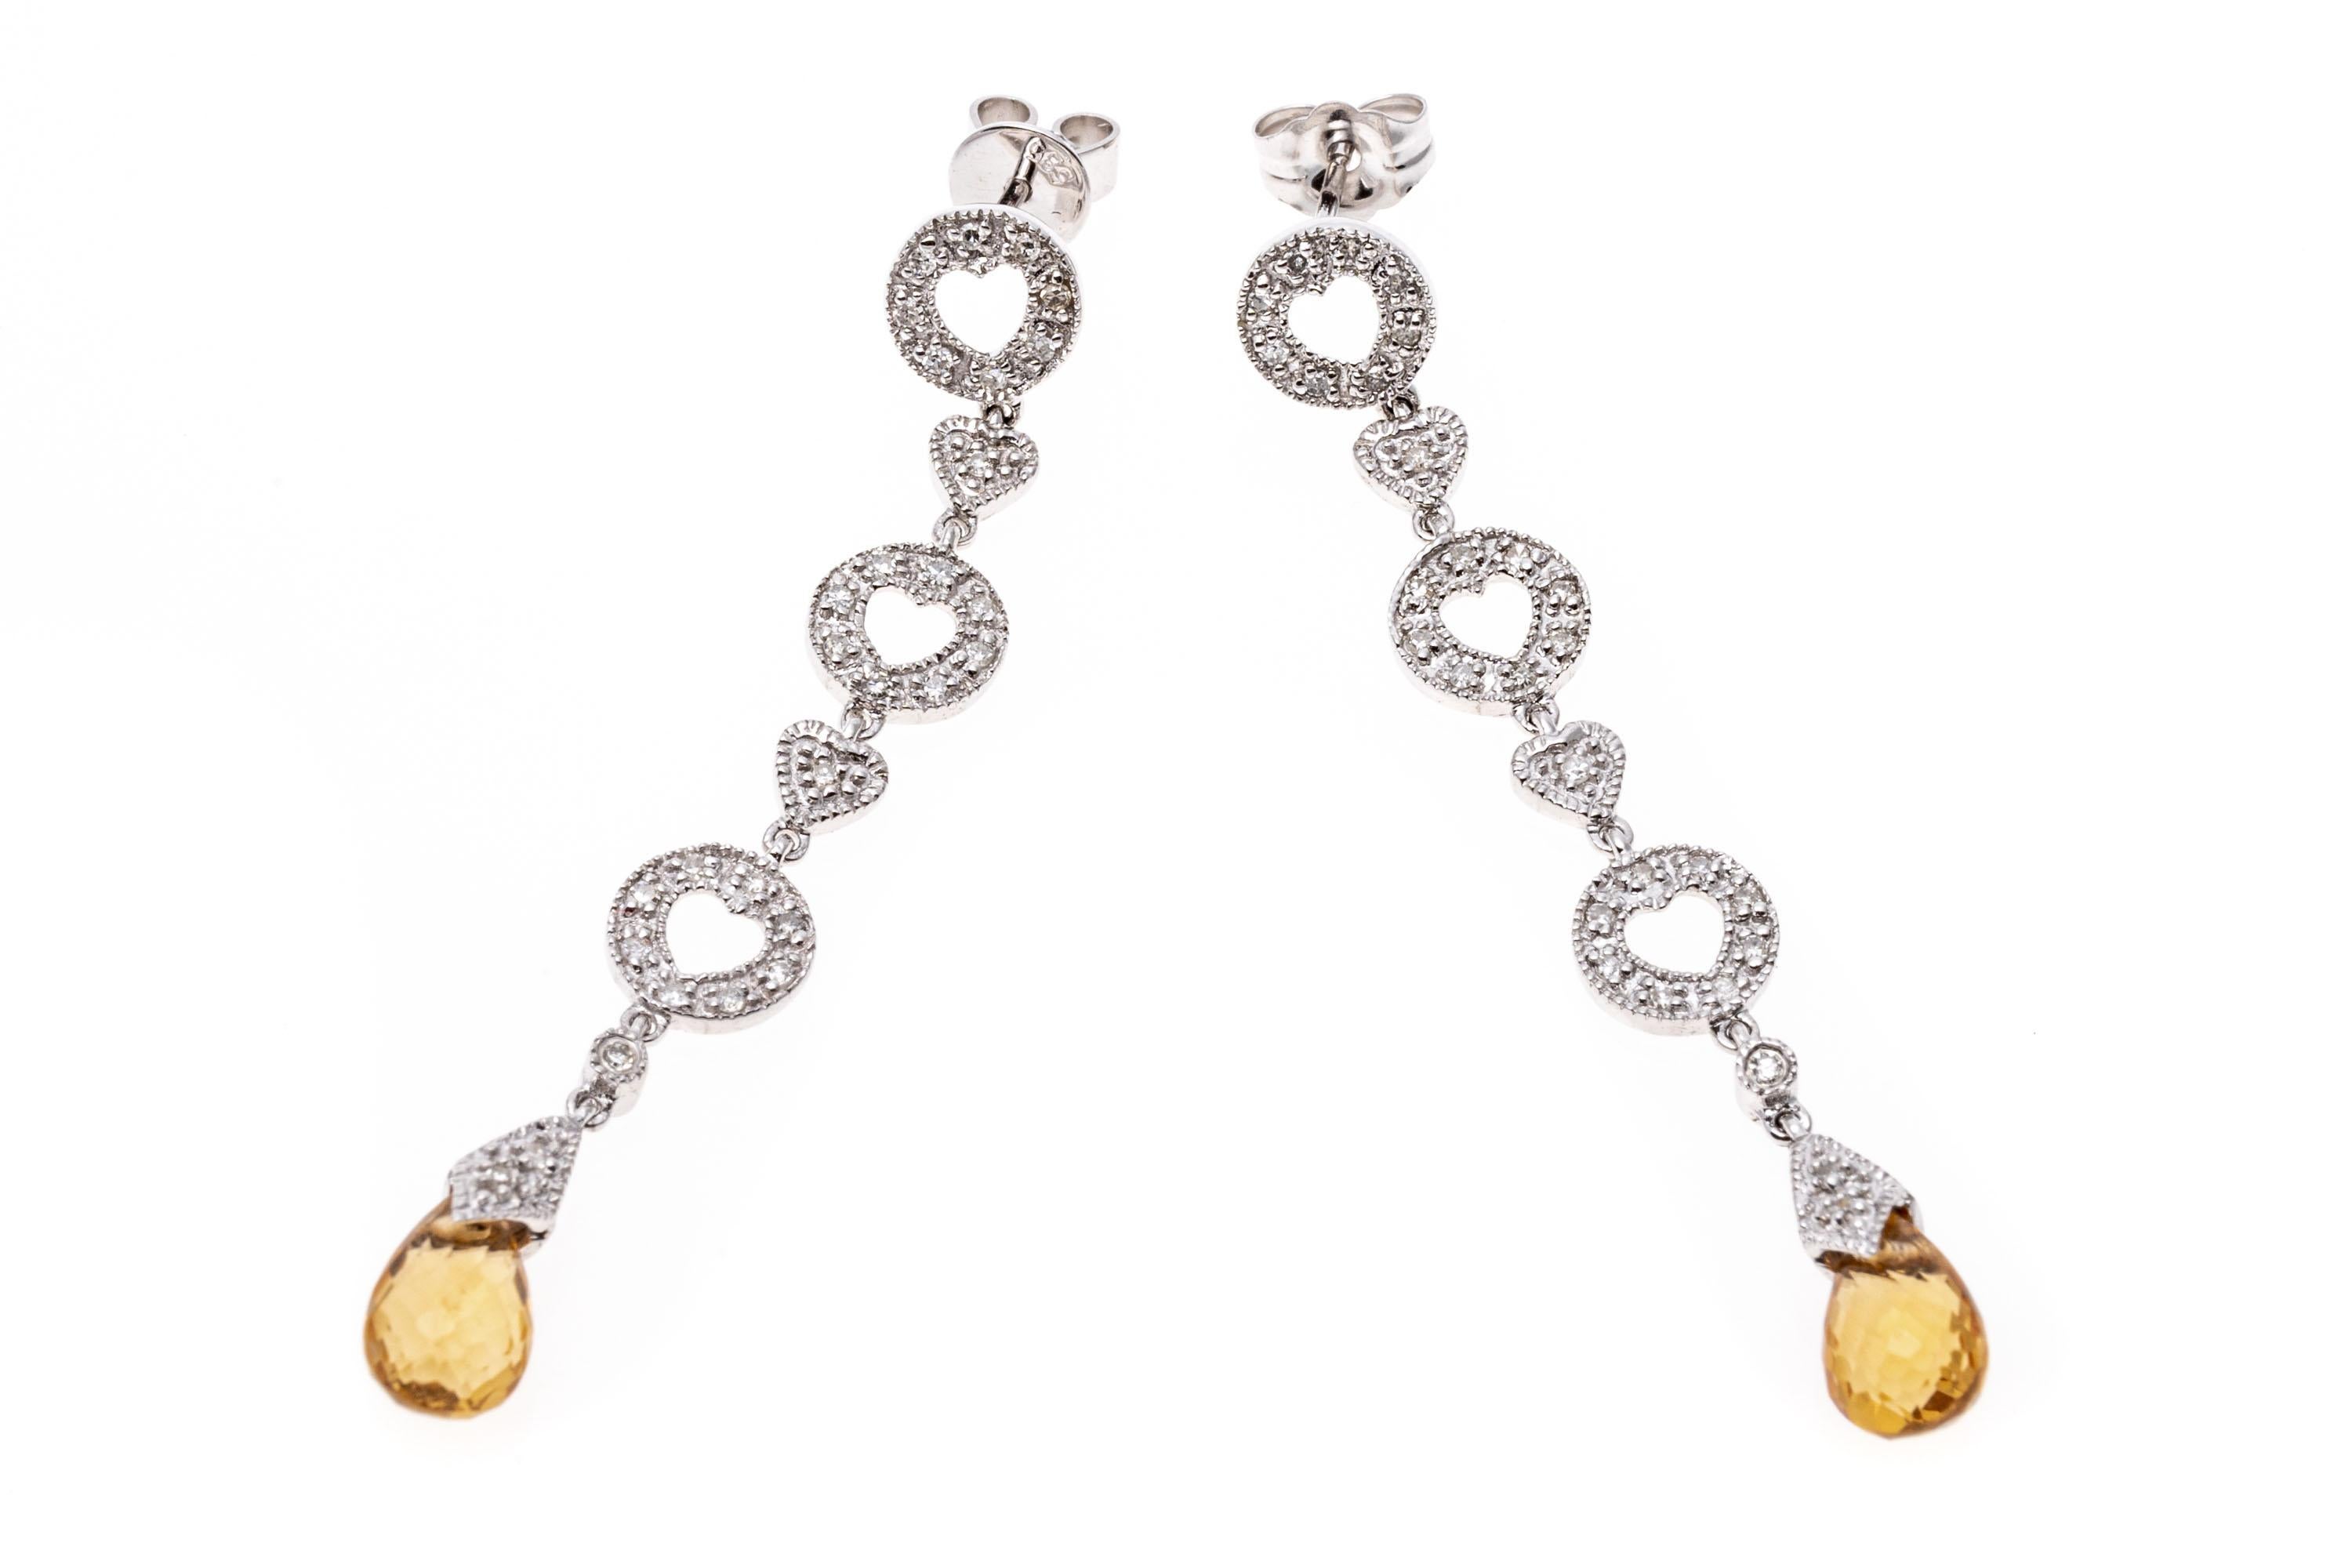 14k white gold earrings. These whimsical pendant earrings have a pretty heart motif top and stacked heart line, set with round faceted diamonds. Suspended from the line is a drop with a faceted briolette shaped, light yellow citrine stones. The